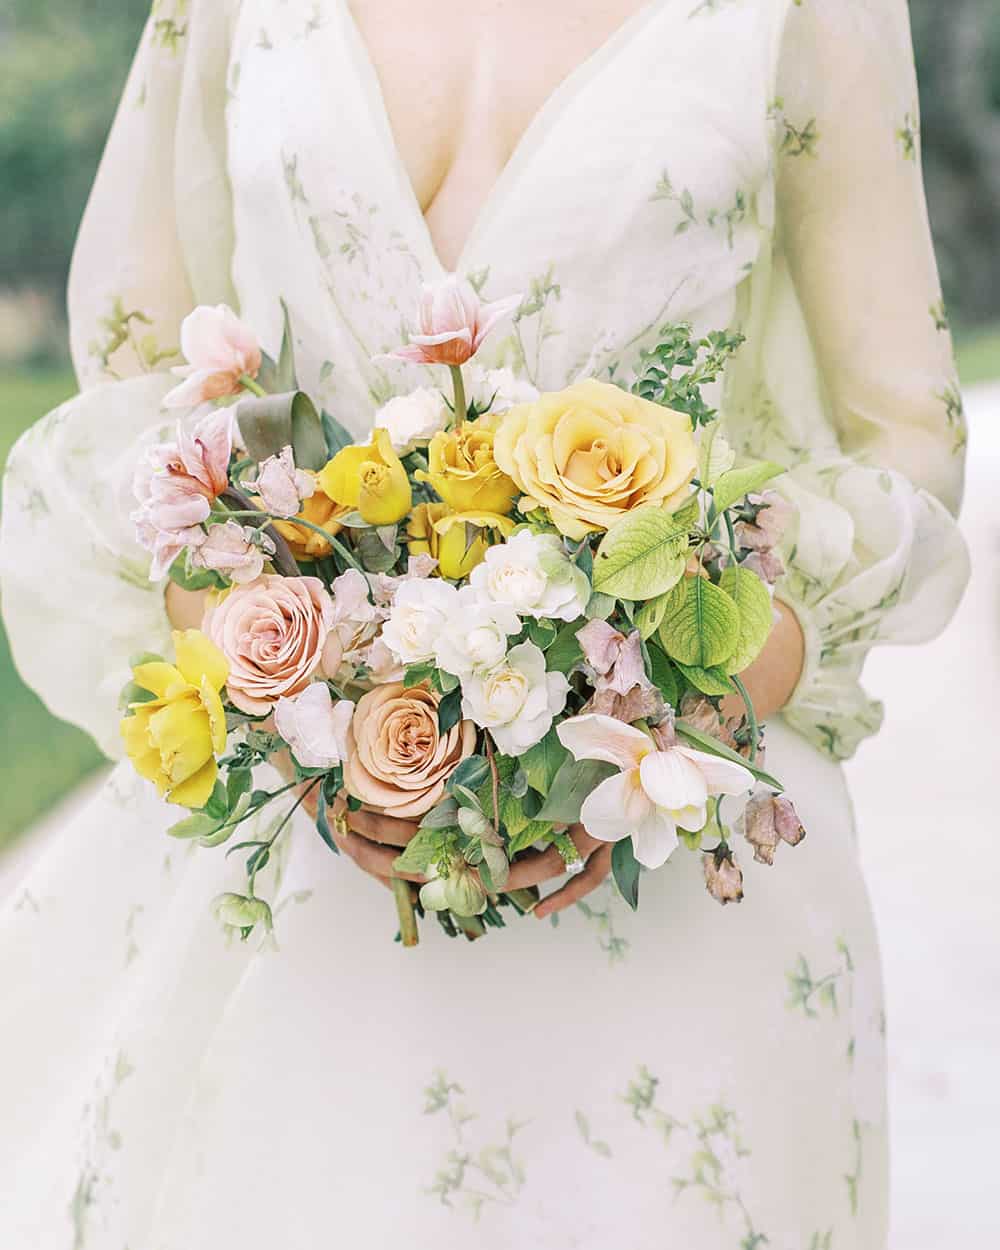 Sorbet Wedding Colors With A Pink Monique Lhuillier Gown ⋆ Ruffled